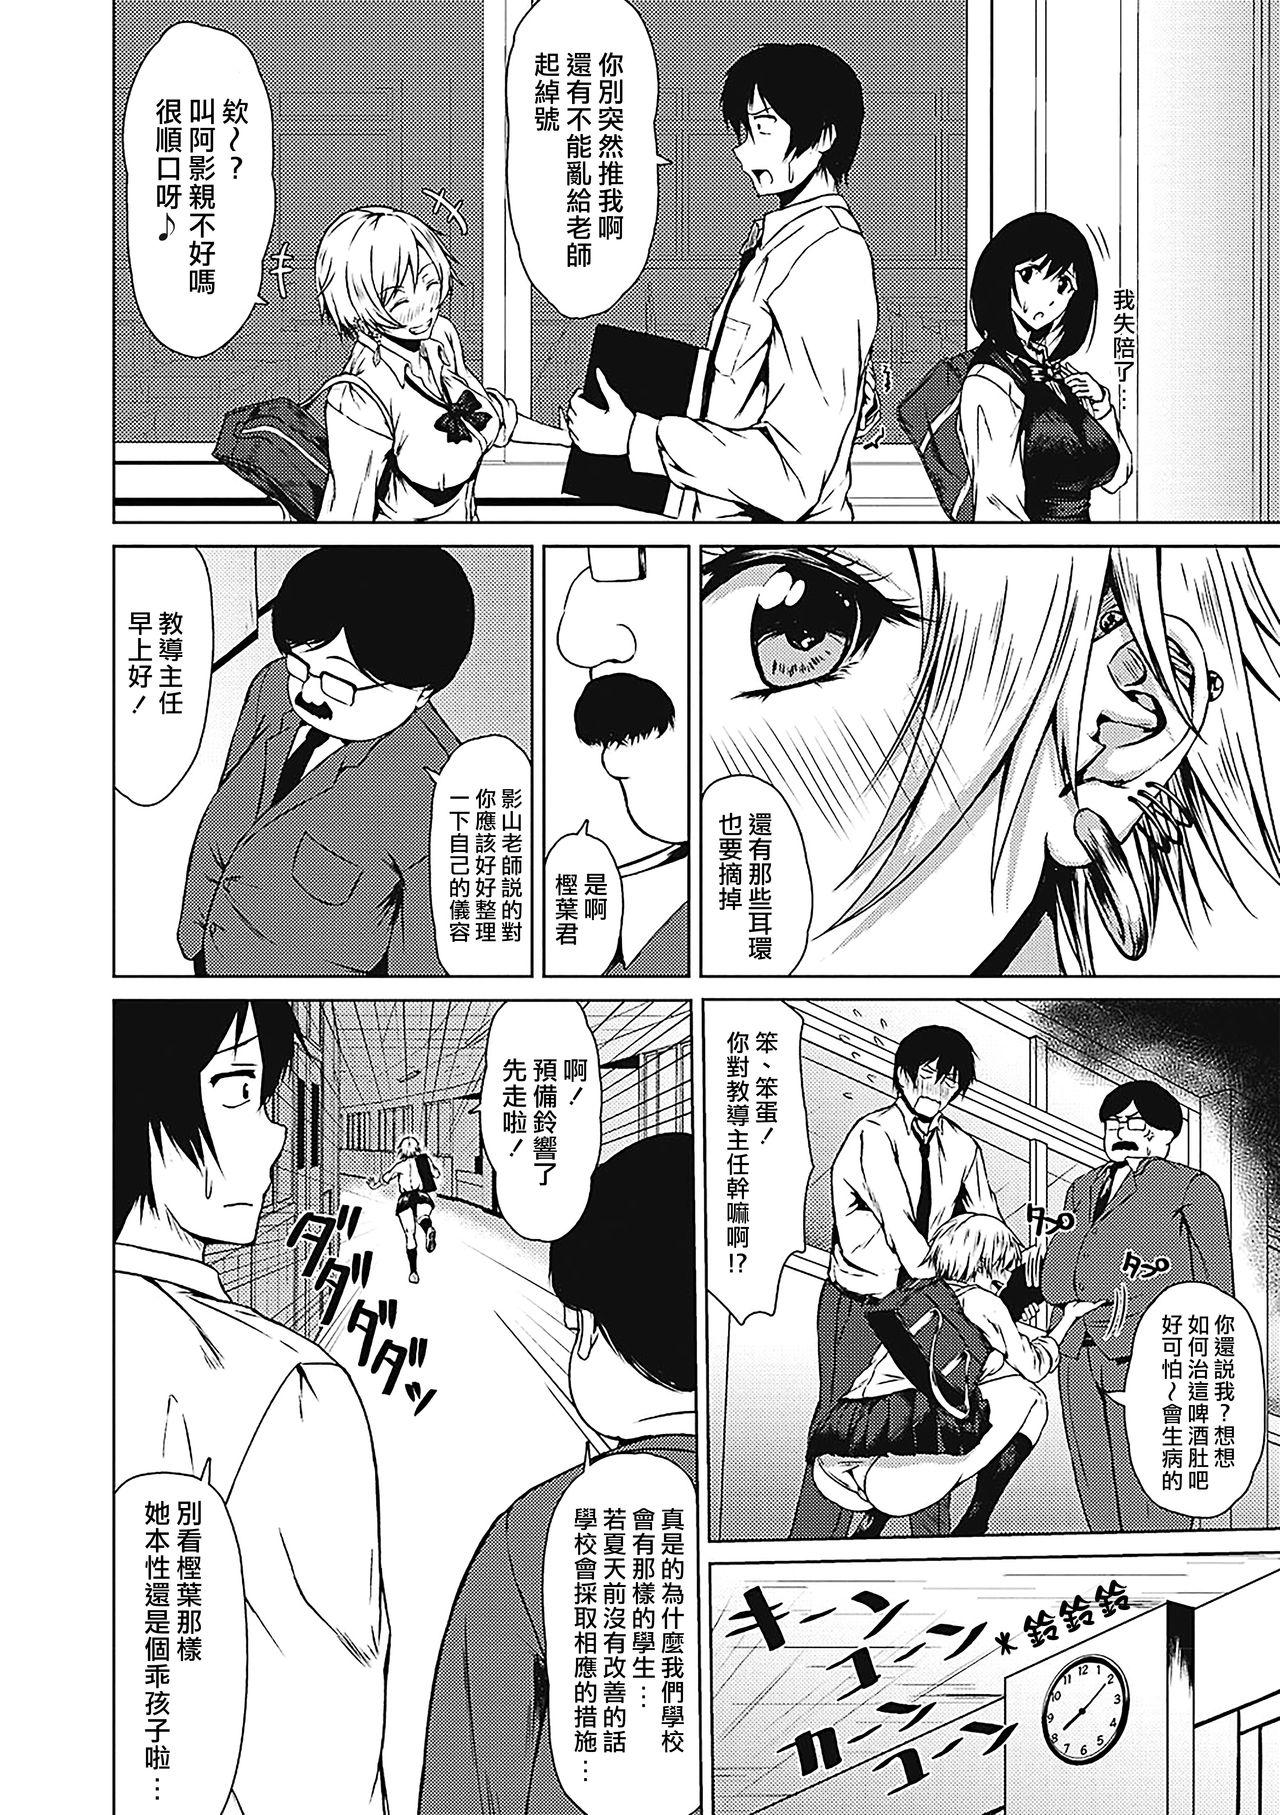 Humiliation Tuning Point！ | 轉折點！ Flash - Page 2